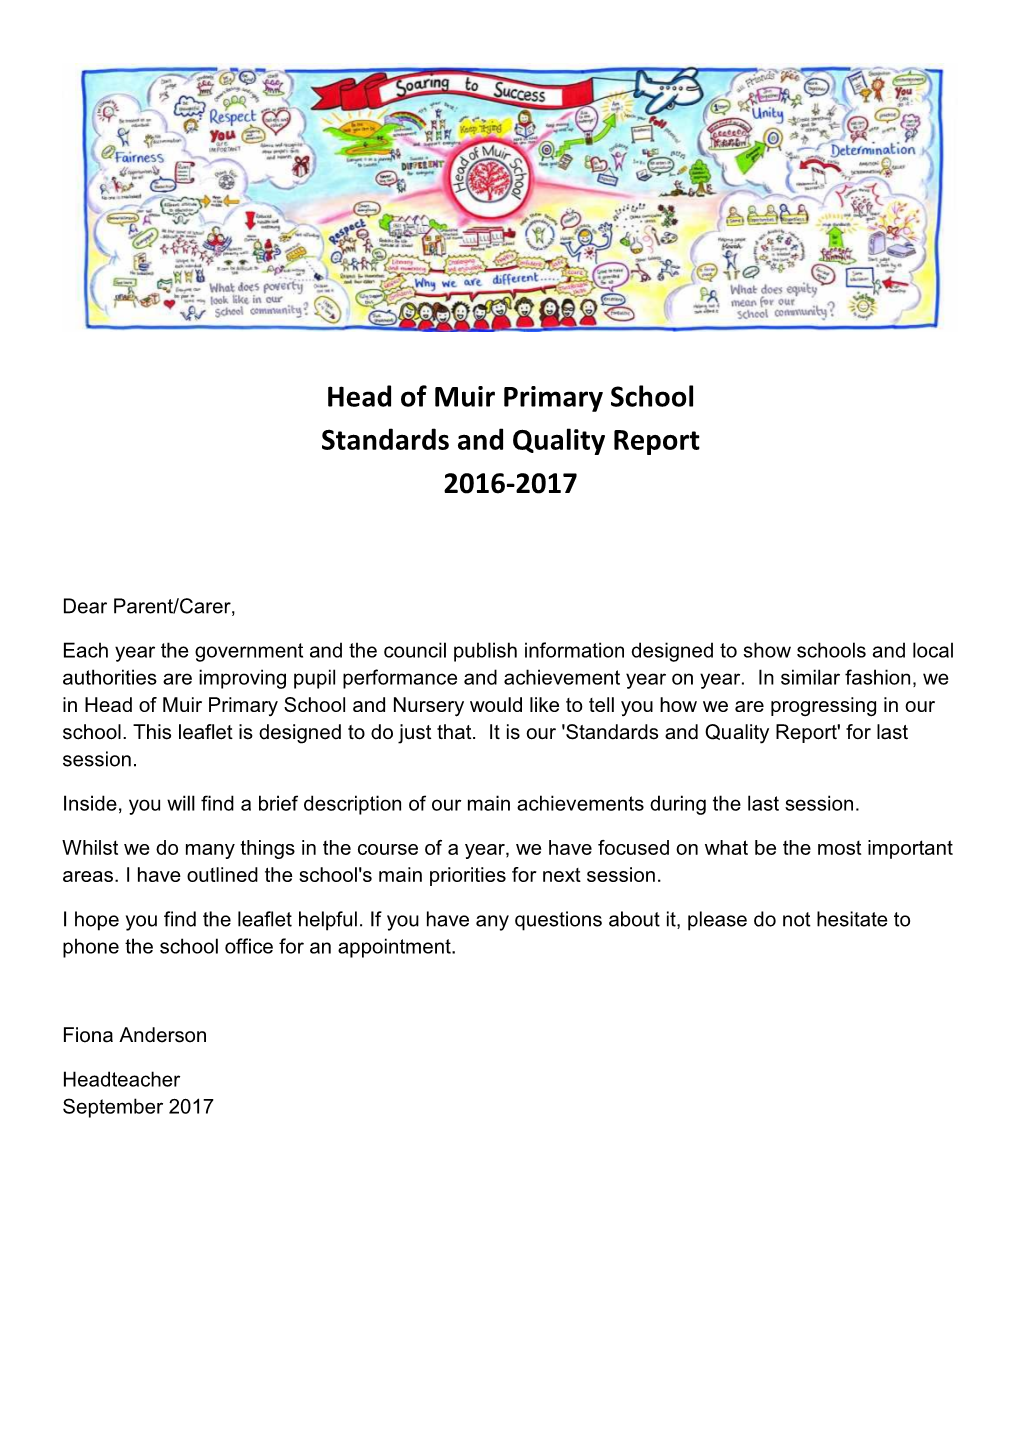 Head of Muir Primary School Standards and Quality Report 2016-2017